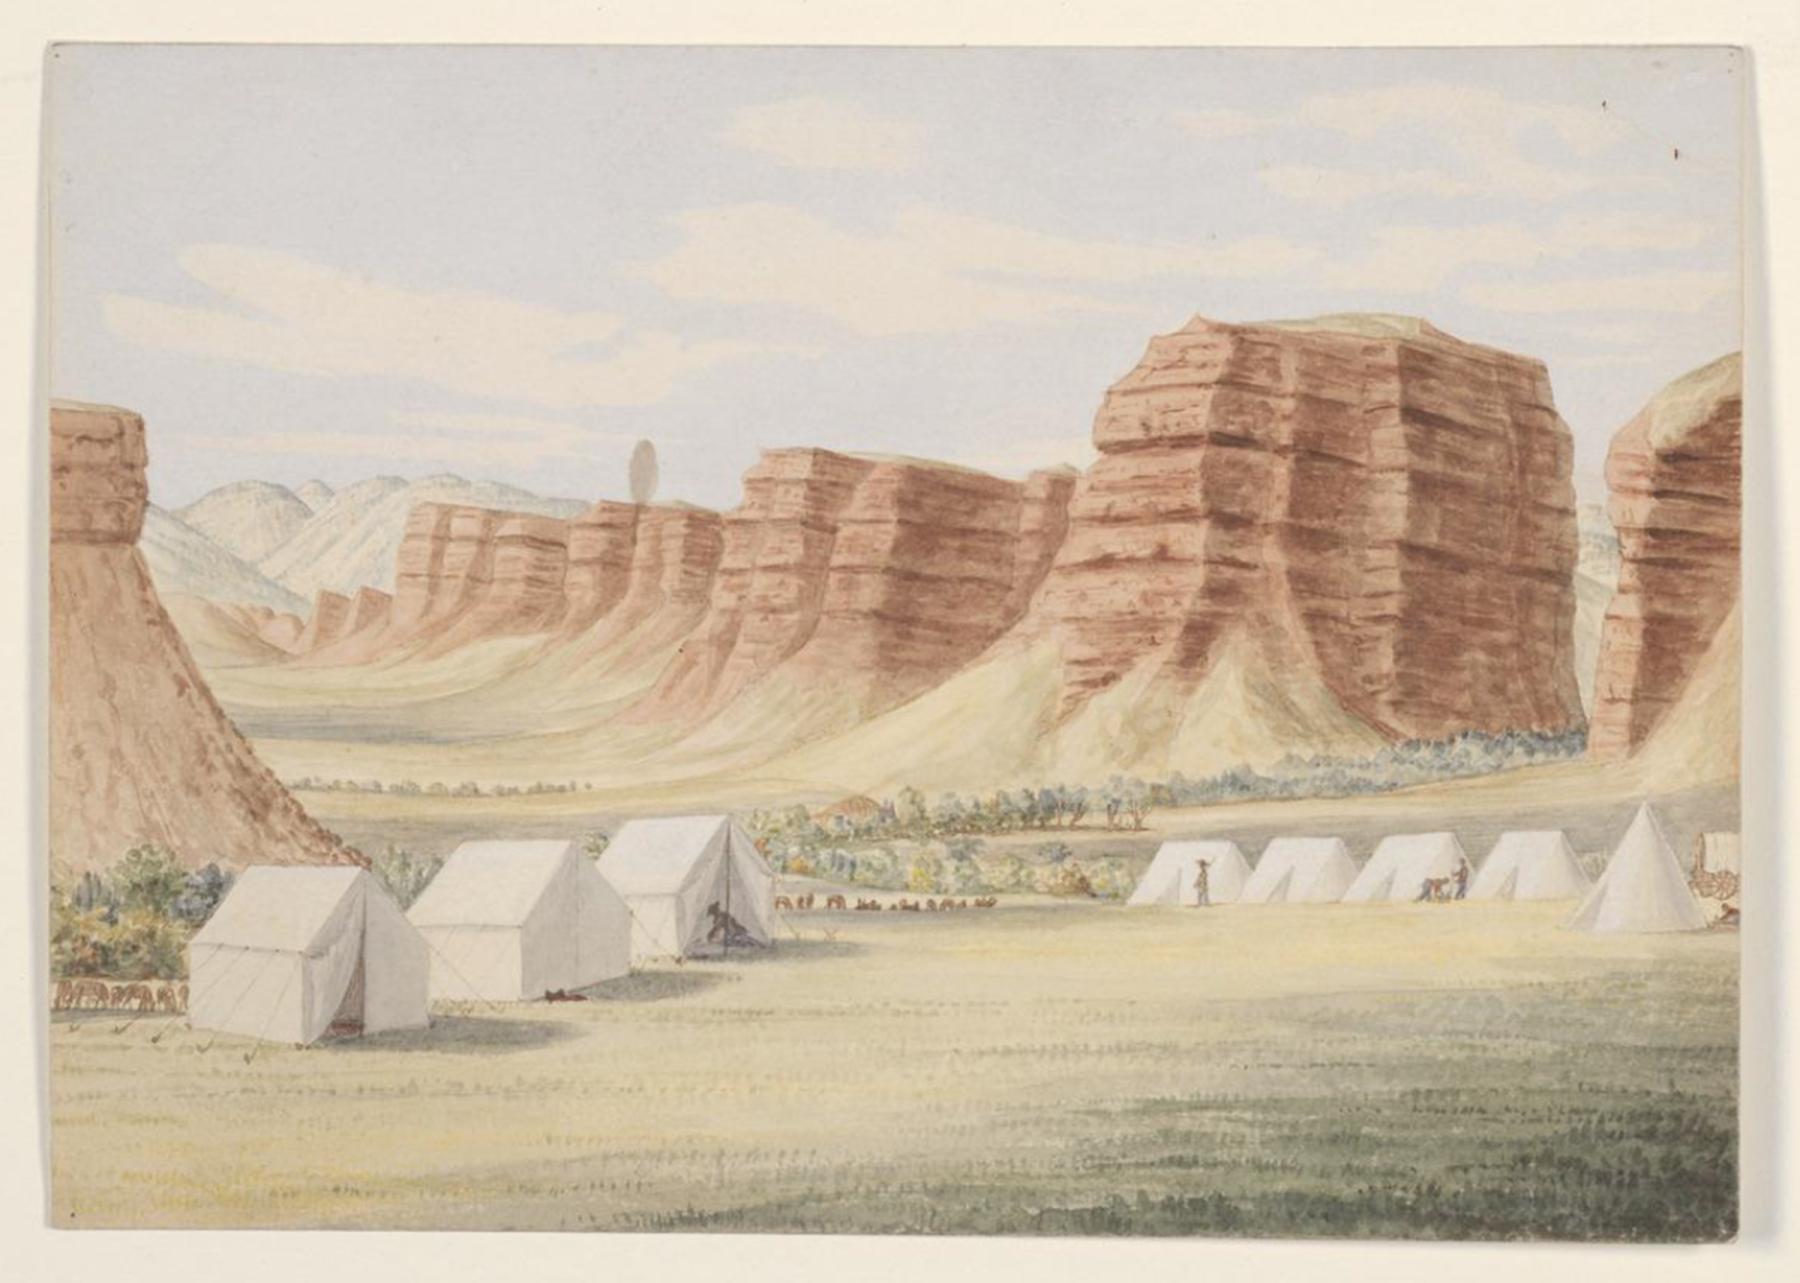 The expedition camped at this location on October 2, 1859. Raynolds wrote: “One large butte . . . seen from a distance, greatly resembles a crumbling castle. The towers and bastions are all complete, and the likeness to an old ruin is indeed extraordinary.”  Expedition artist Anton Schönborn titled this watercolor “Red buttes on Powder River.” These appear to be buttes in the so-called Red Wall that runs tens of miles north and south from present Barnum, west of Kaycee, Wyoming in the southern Bighorn Mount